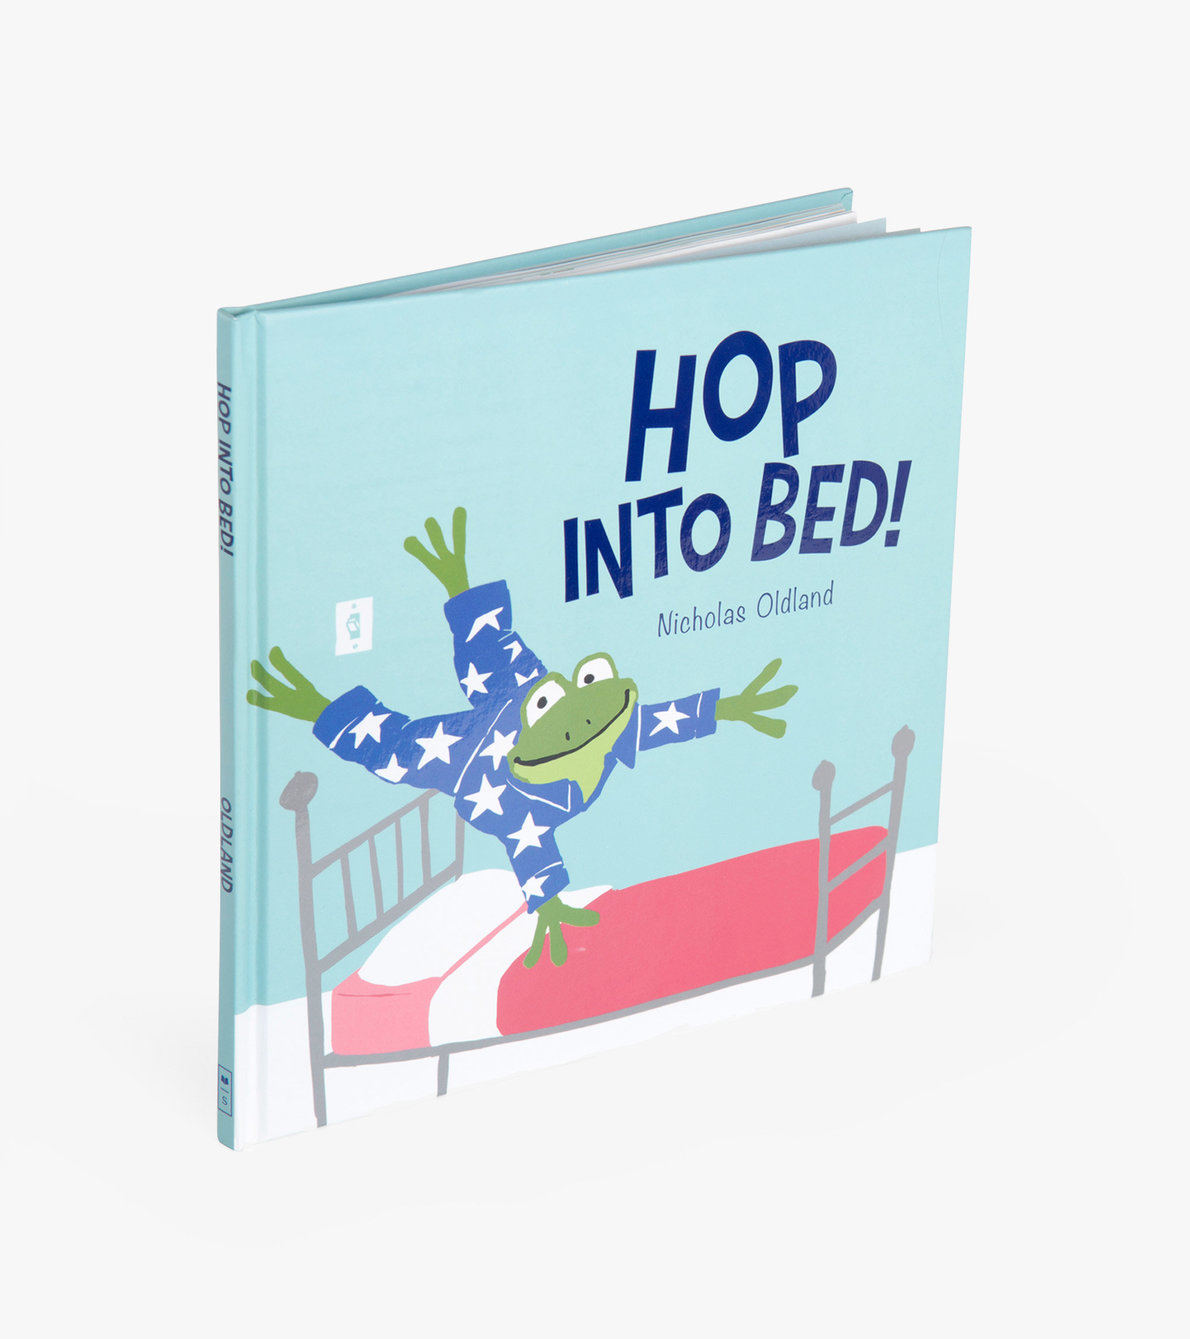 View larger image of "Hop into Bed" Children's Book